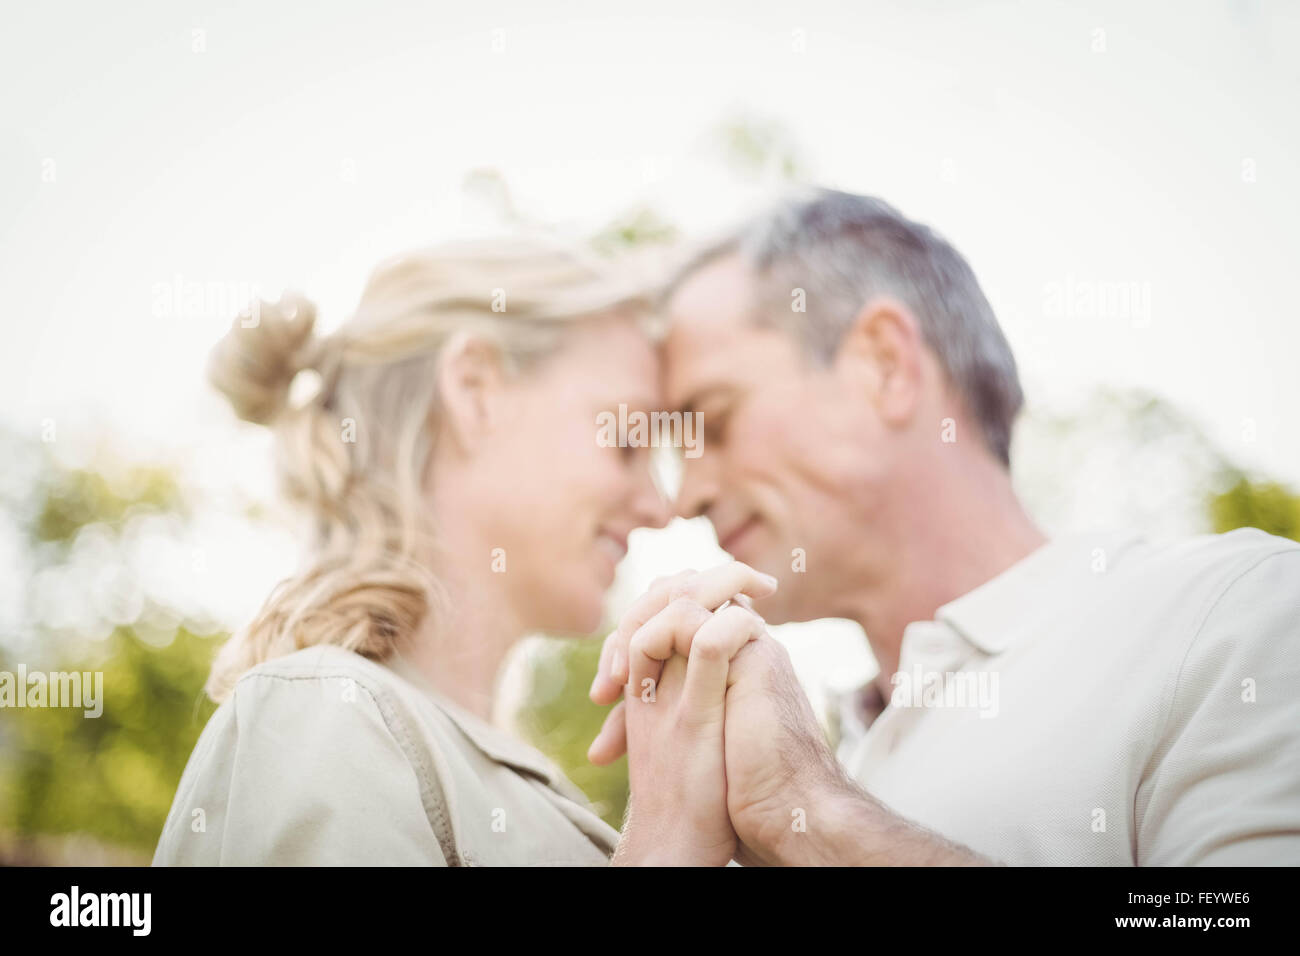 Cute couple dancing and holding hands Banque D'Images